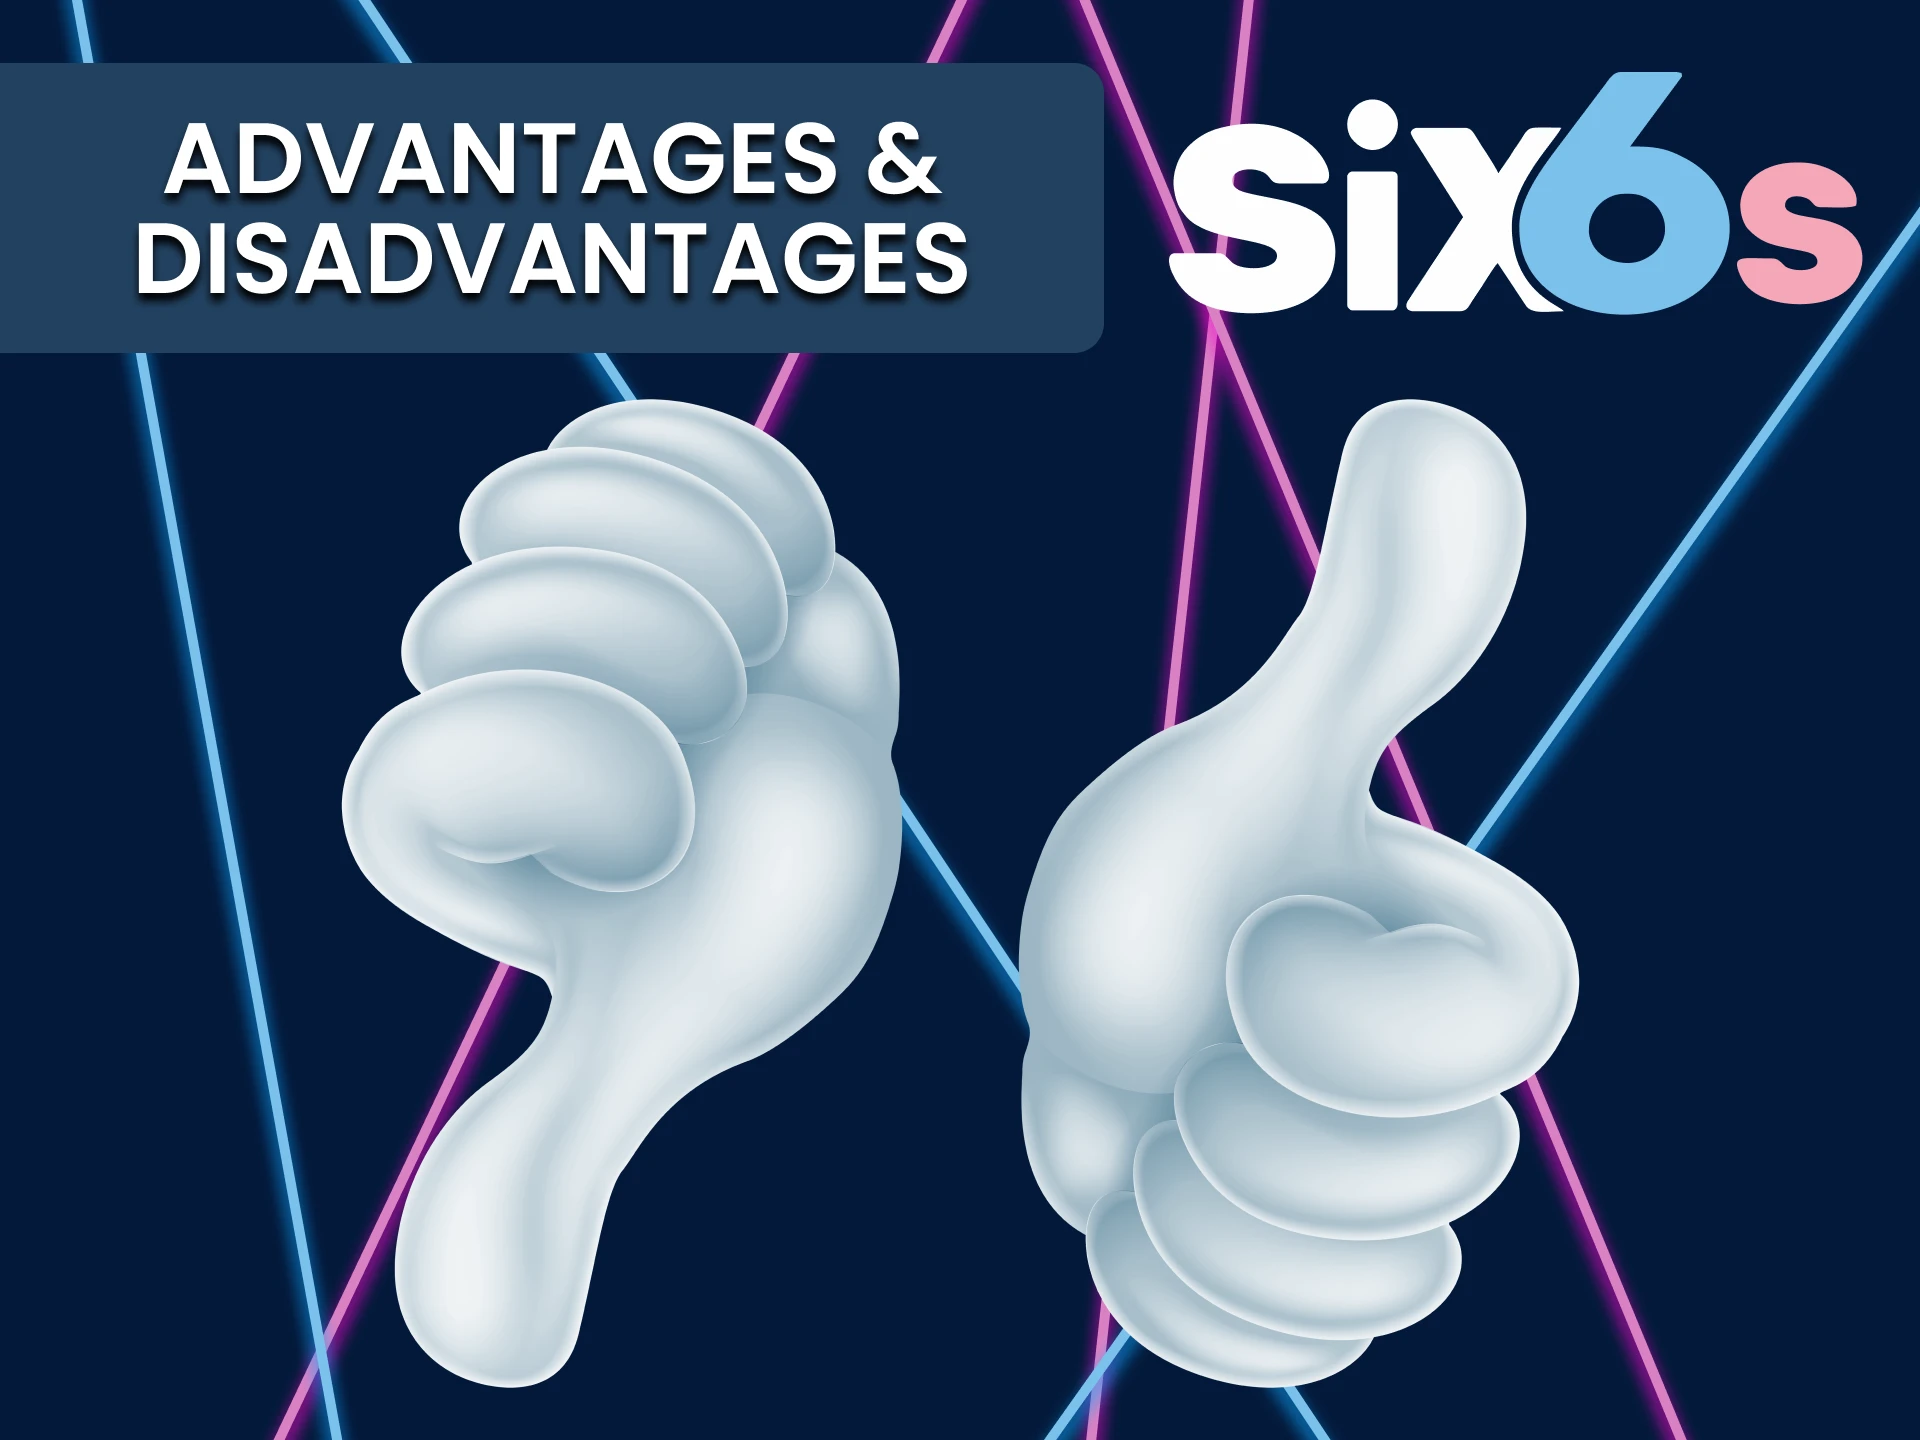 Learn the pros and cons of Six6s.